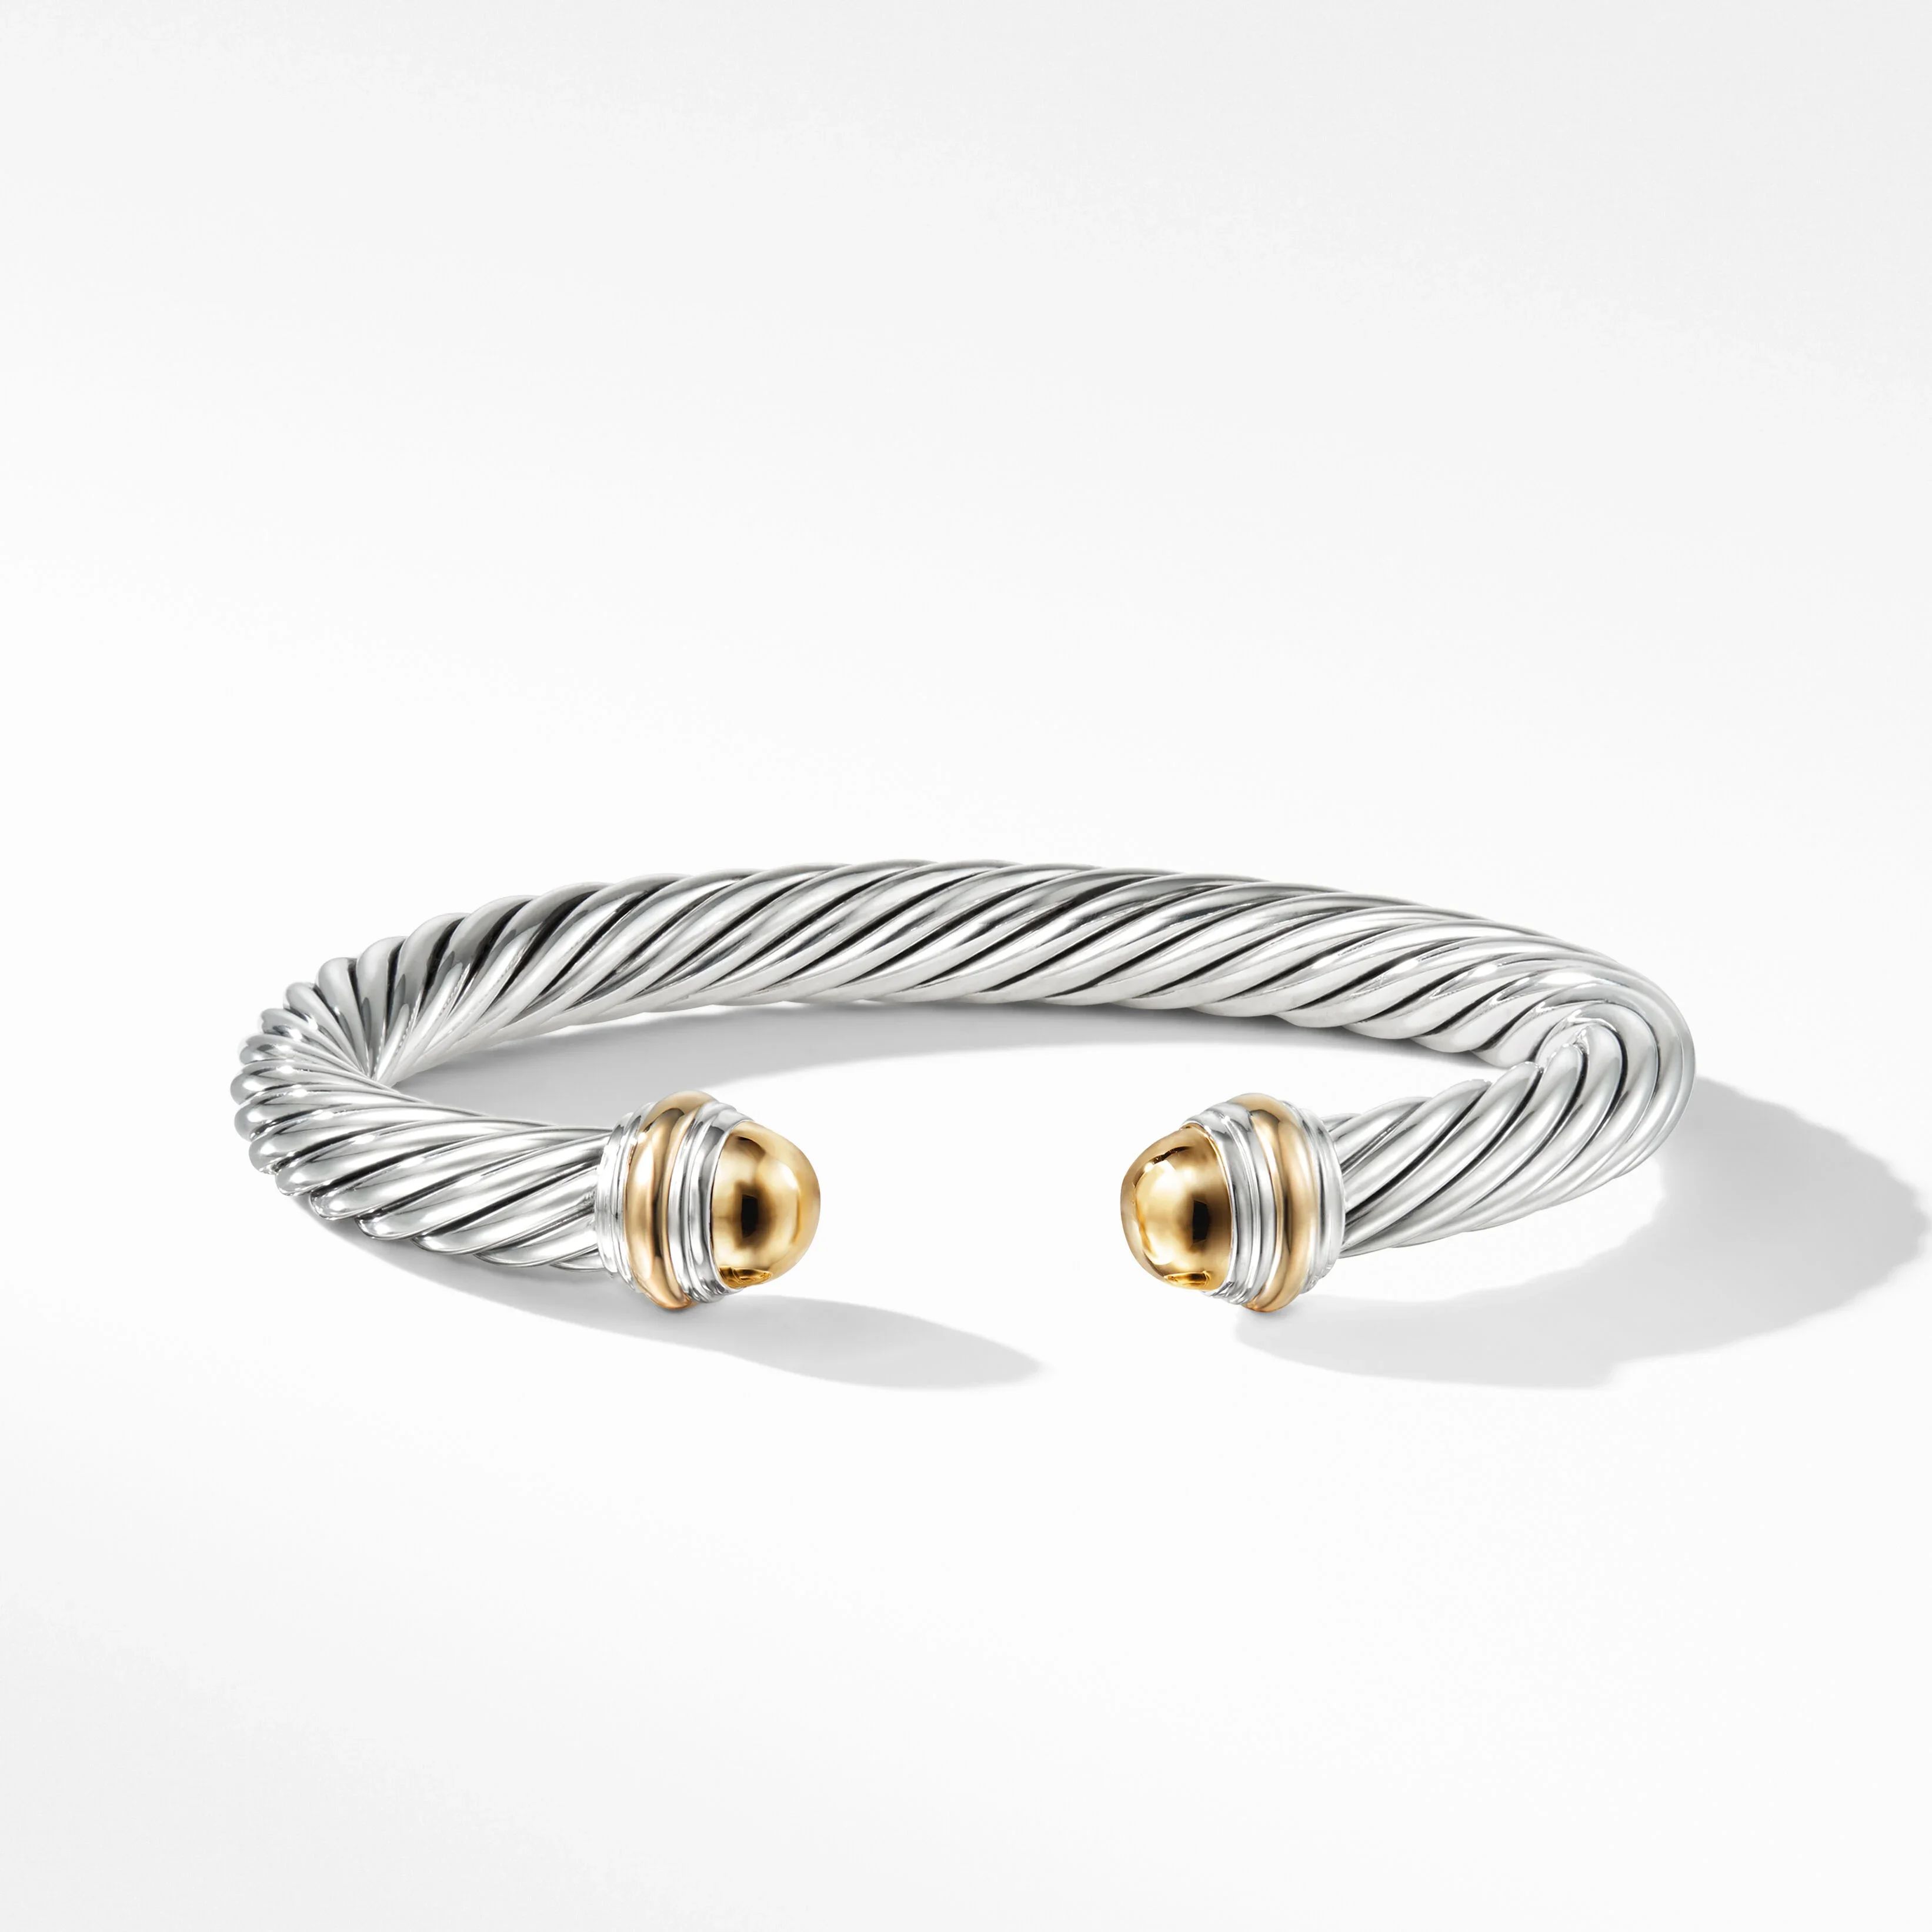 Cable Classics Bracelet in Sterling Silver with 14K Yellow Gold Domes | David Yurman